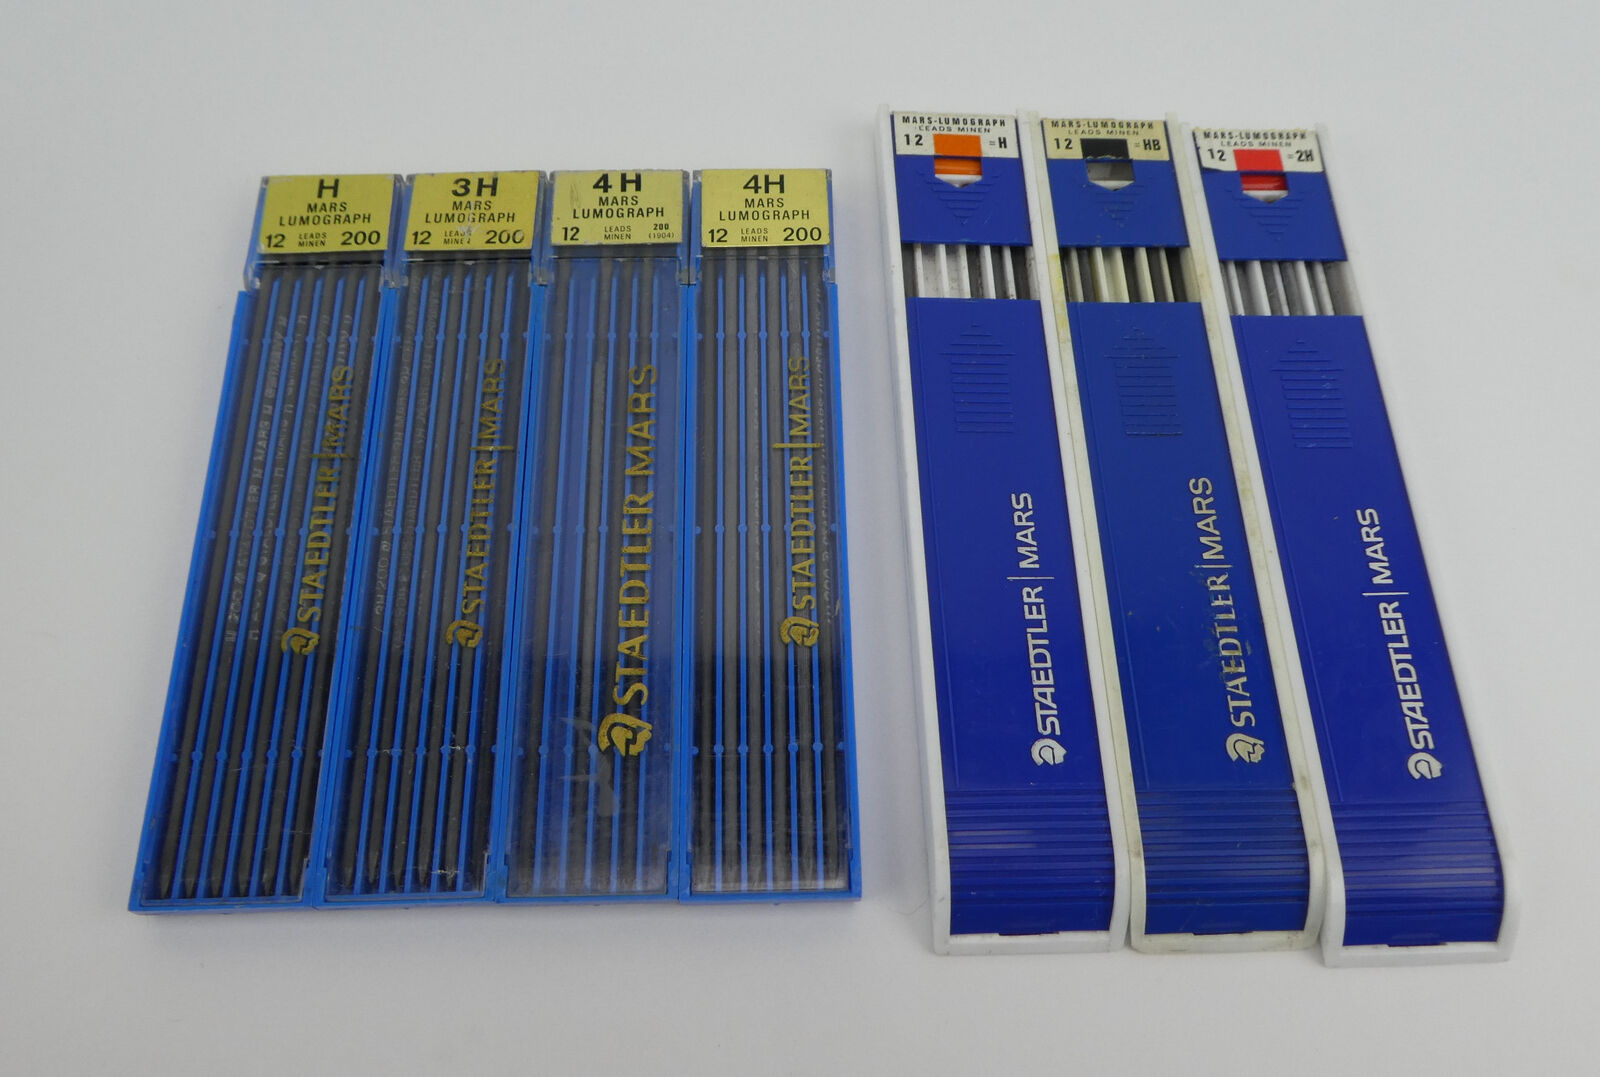 Lot of 58 Staedtler Mars Lumograph 200 Pencil Leads / Sizes H 2H 3H 4H HB